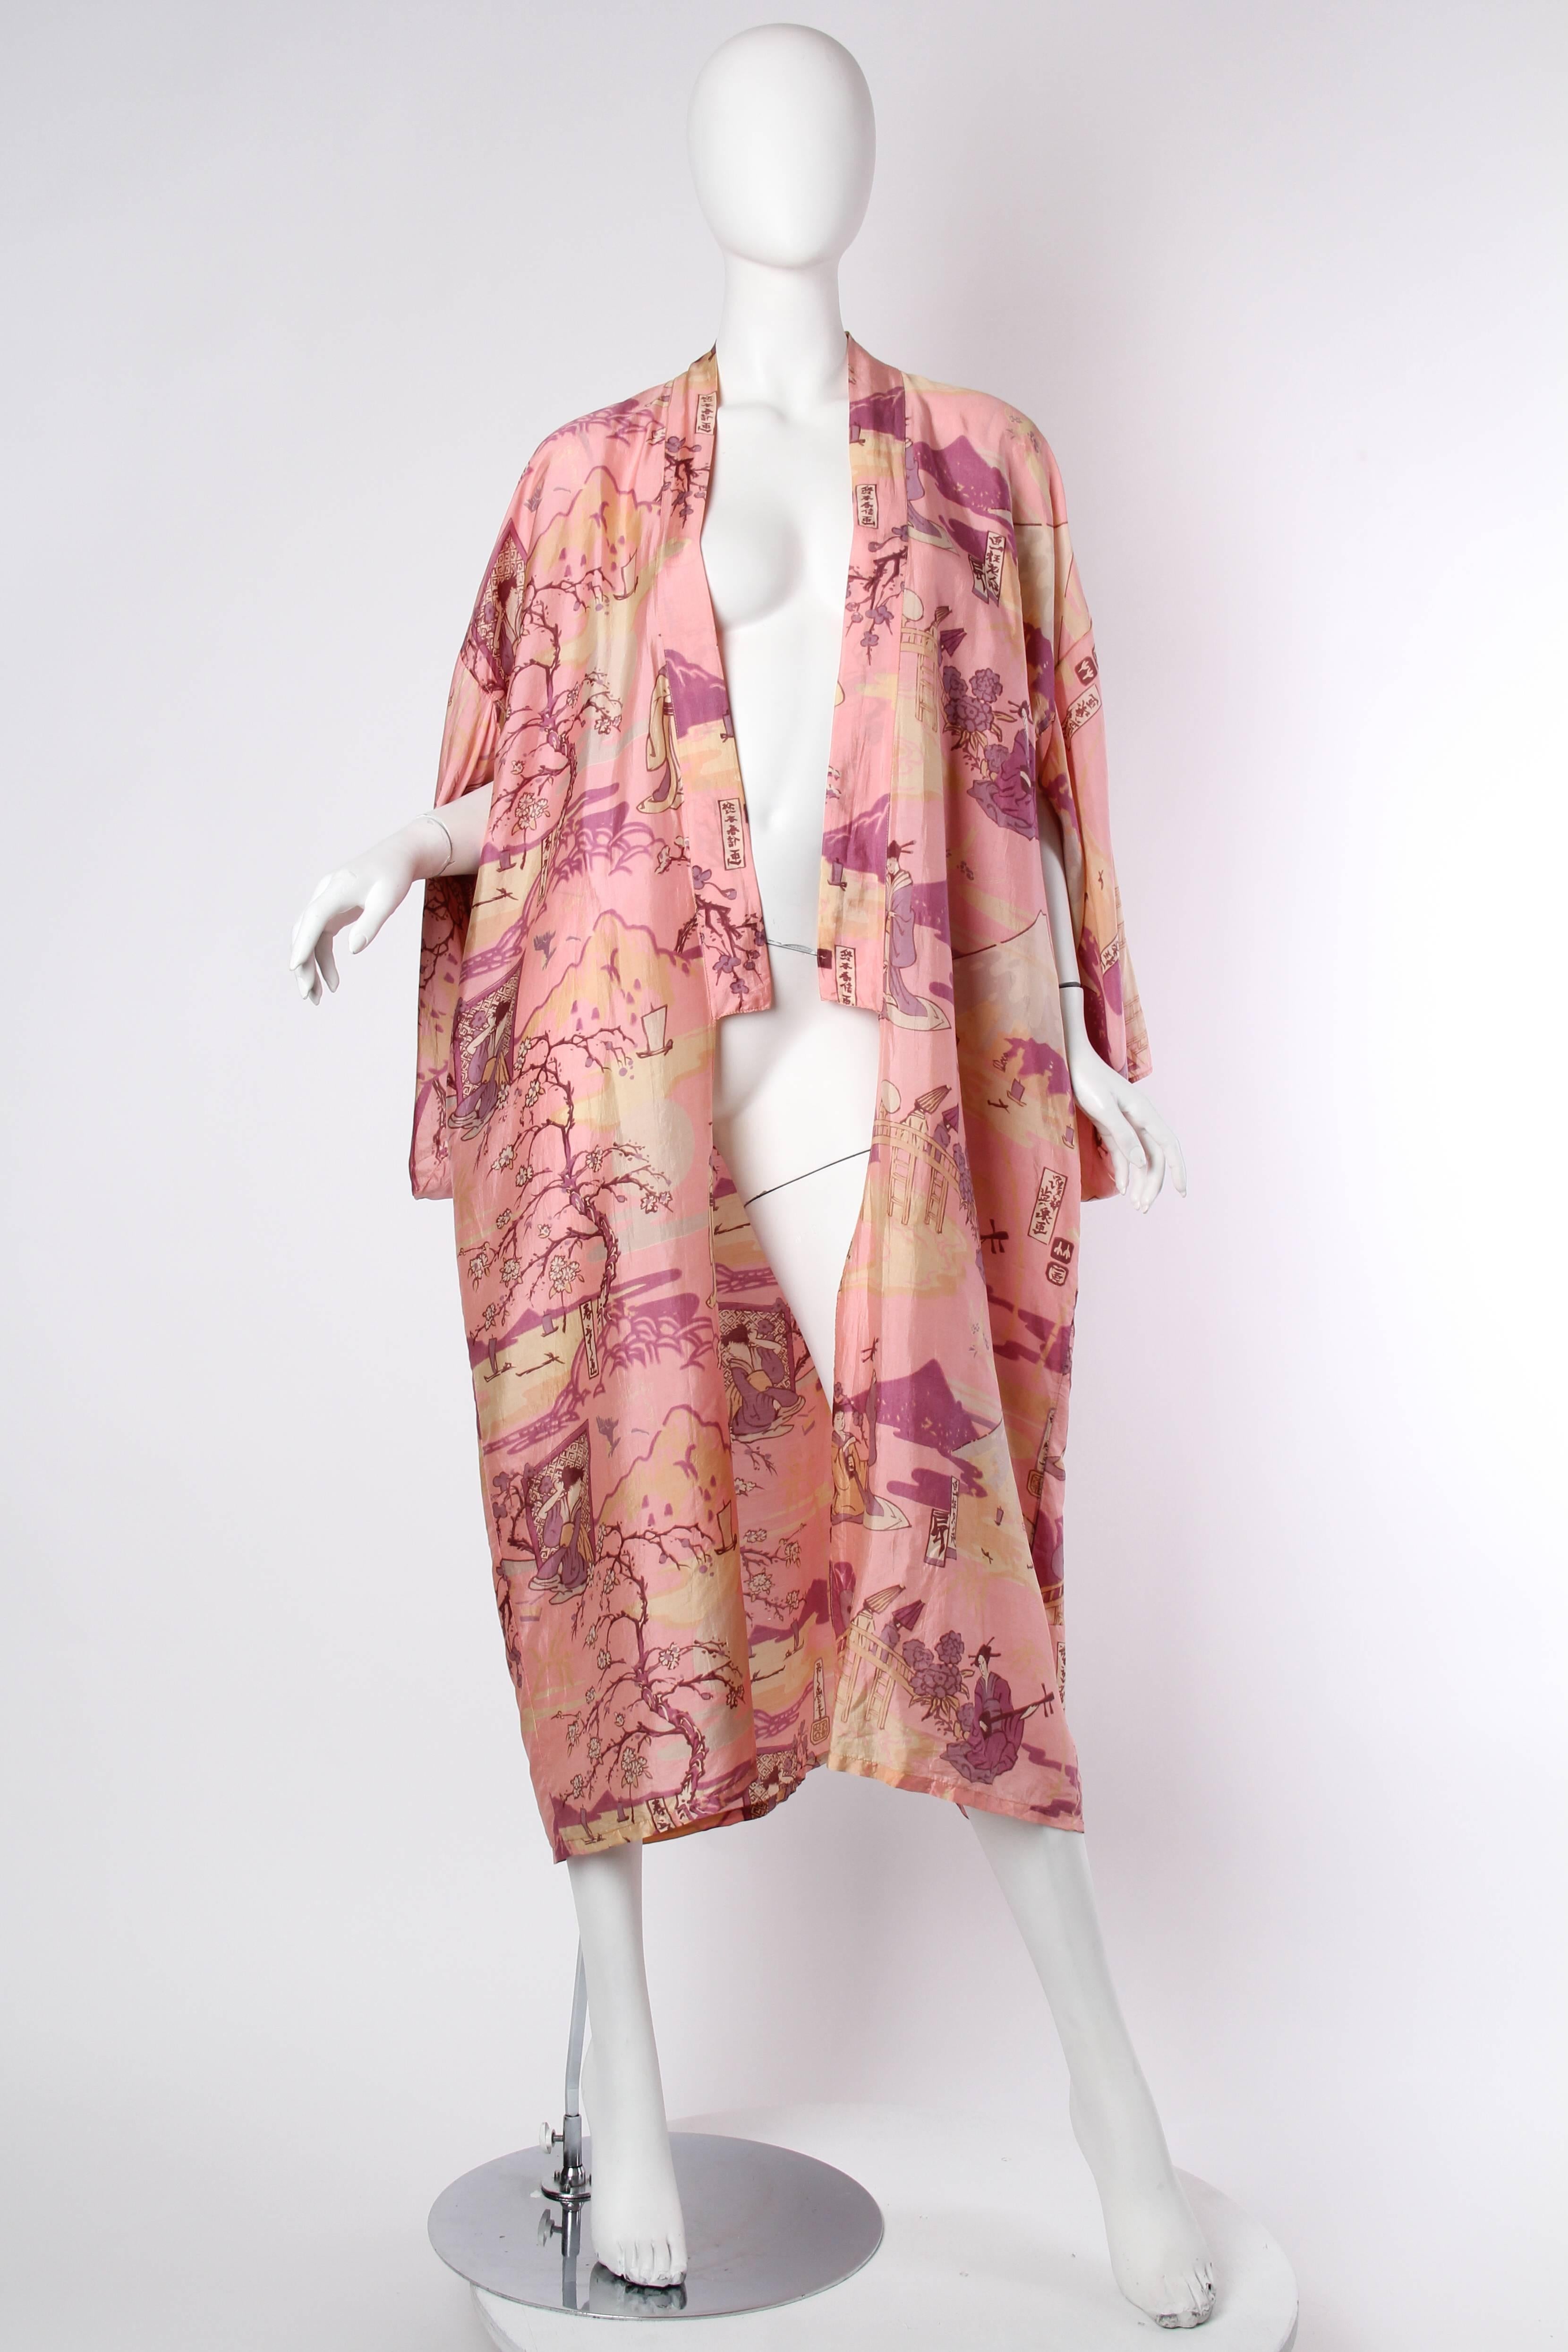 Let these ladies serenade you as you put your look together in your boudoir. Or take them out with you on the town as these lightweight kimonos are THE must have piece of next season. Get it first before they all wear it. This kimono is in